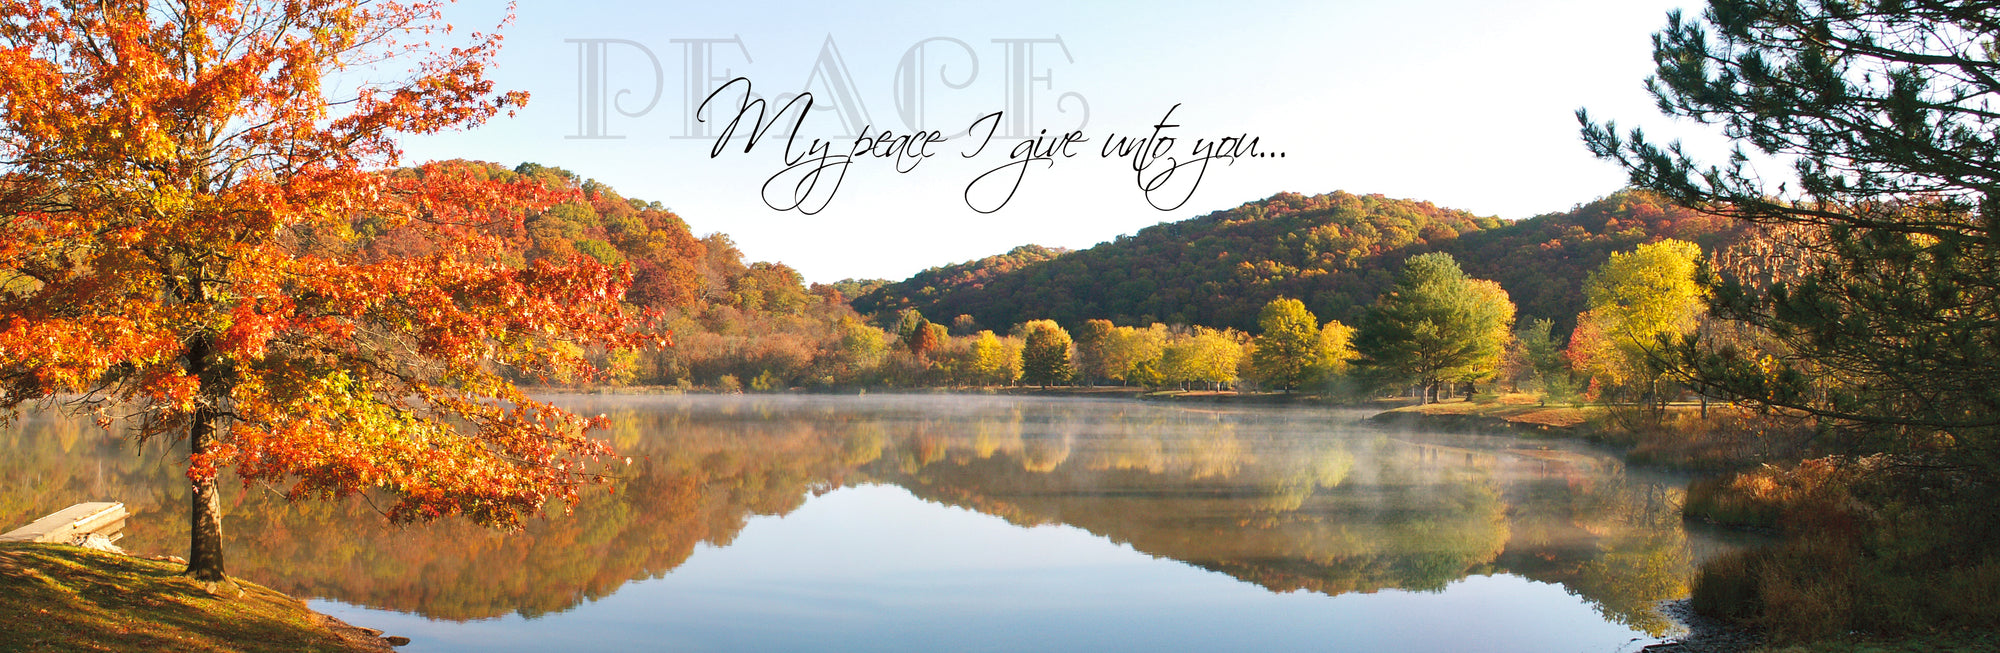 Fall Landscape and Lake at Beech Fork State Park with scripture verse.